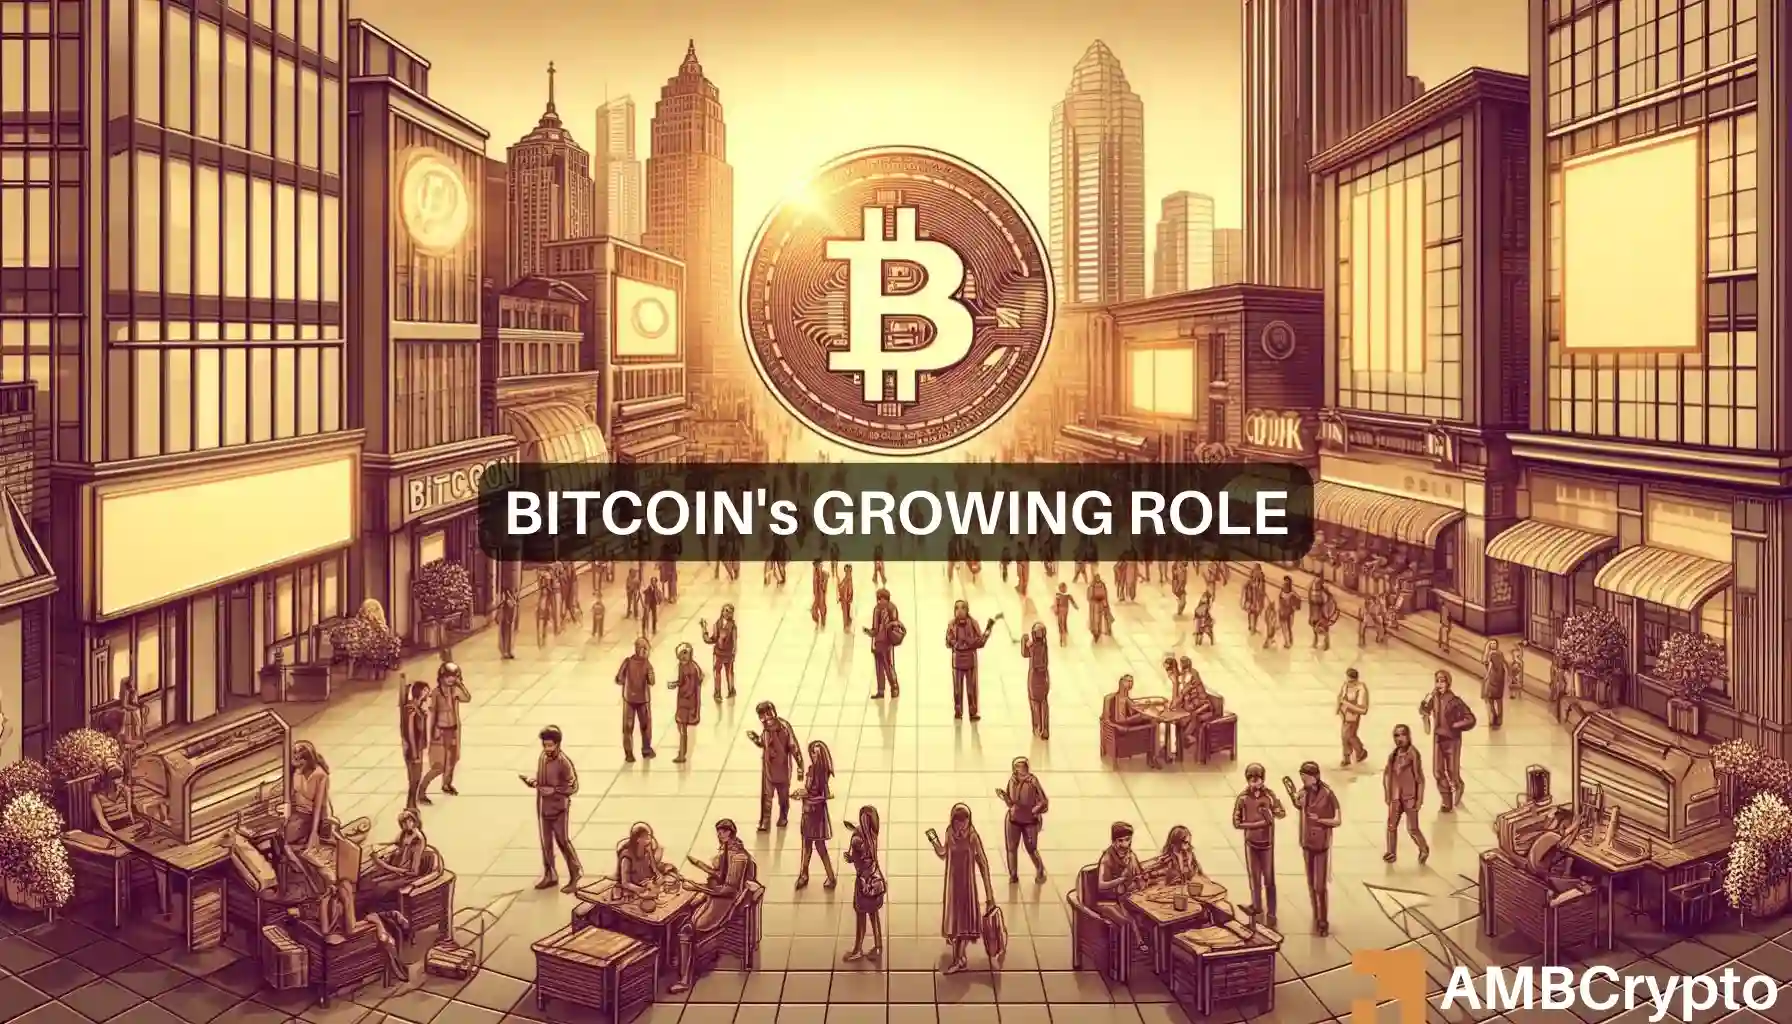 Wall Street’s changing stance on Bitcoin: From threat to opportunity!